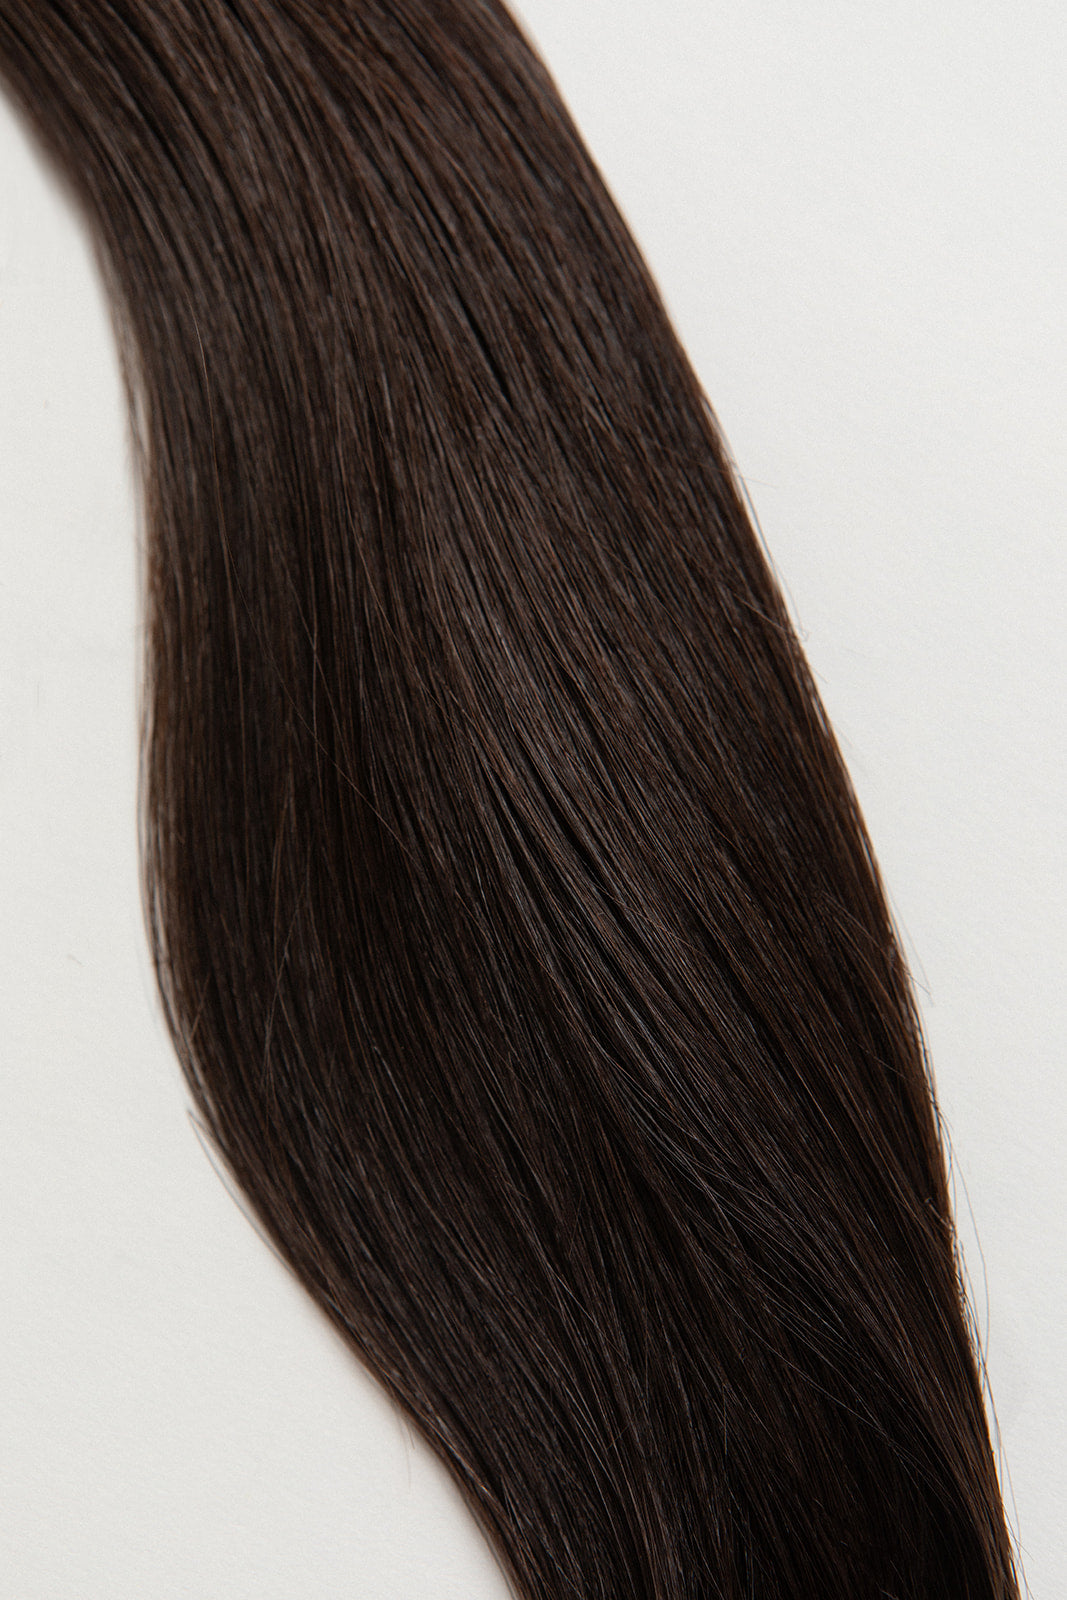 Shade is our dark brown with cool and warm undertones. Stylist lingo: Natural level 5 Hidden Harloc Clip-In Extensions are made from ethically sourced, Remy Slavic hair. They come with 5 seamless silicone wefts to ensure an undetectable result that is comfortable to wear. Whether you are looking to add volume or length, a stunning look for a special event, or just want to look and feel gorgeous. Available in 10 of our beautiful shades.